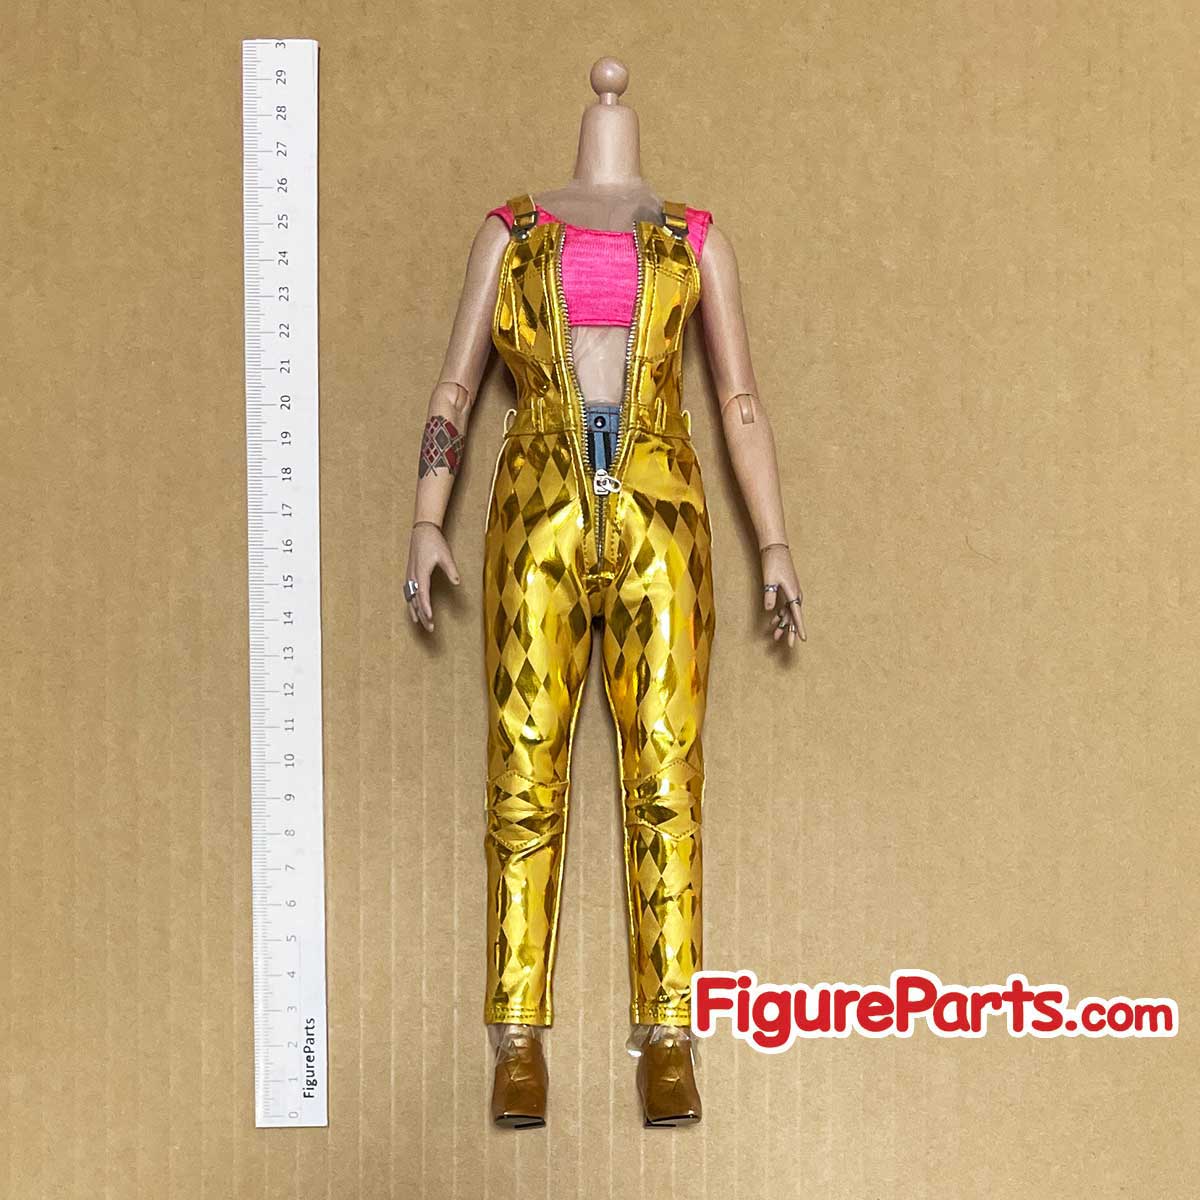 Body with Gold Colored Outfit - Harley Quinn - Birds of Prey - Hot Toys mms565